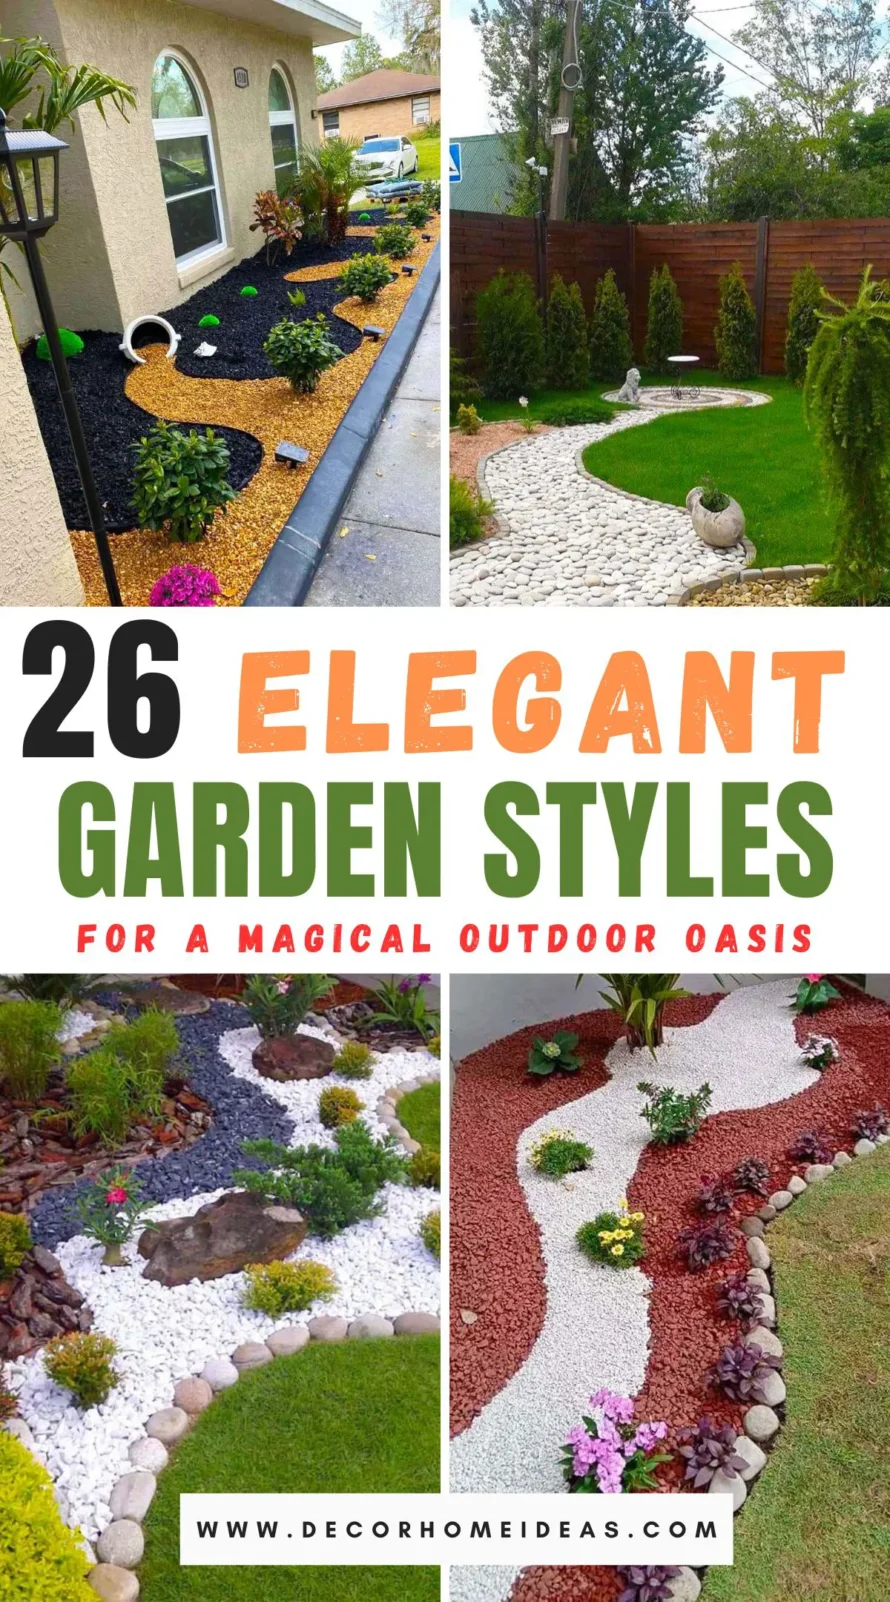 Explore 26 glamorous garden designs that elevate outdoor living to new heights. From elegant water features to lush floral arrangements, each design blends luxury with nature, perfect for enhancing your home's charm. Dive into these beautiful spaces!